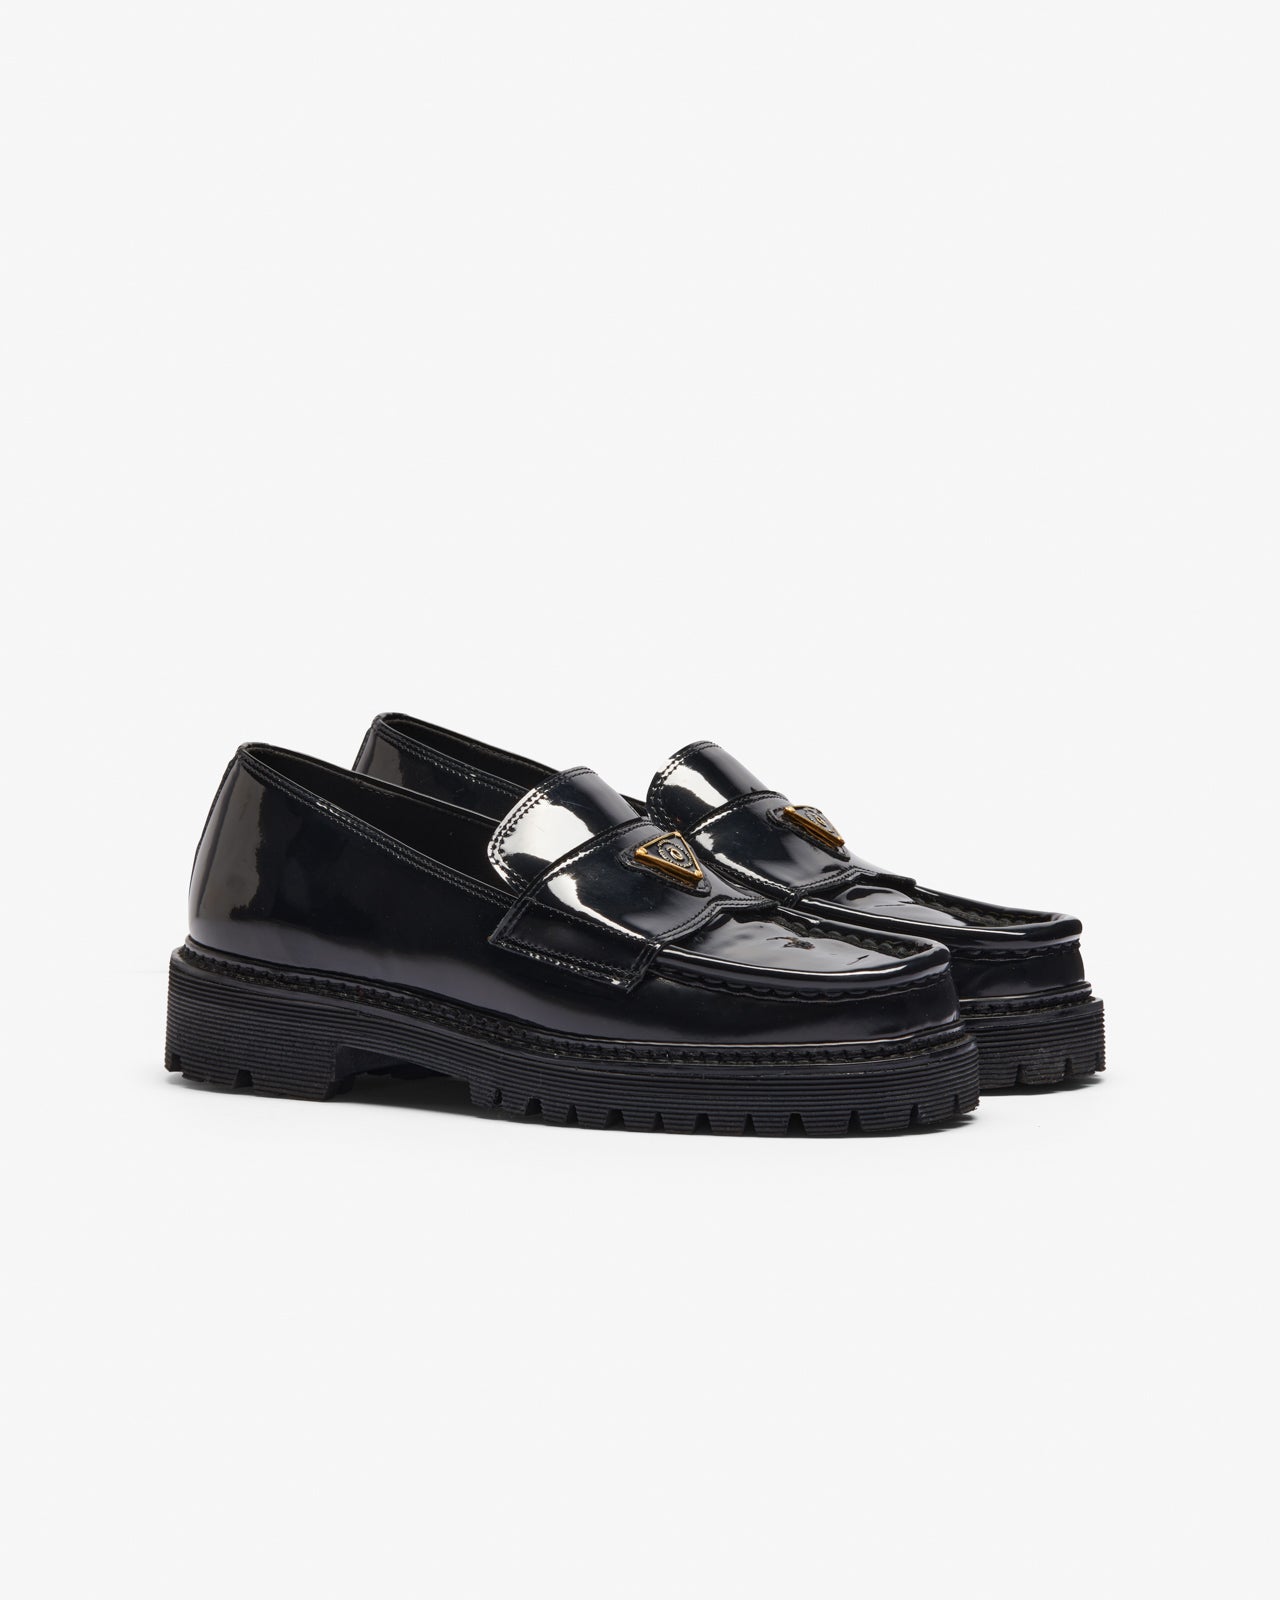 The Noskin Lulie Patent Loafer